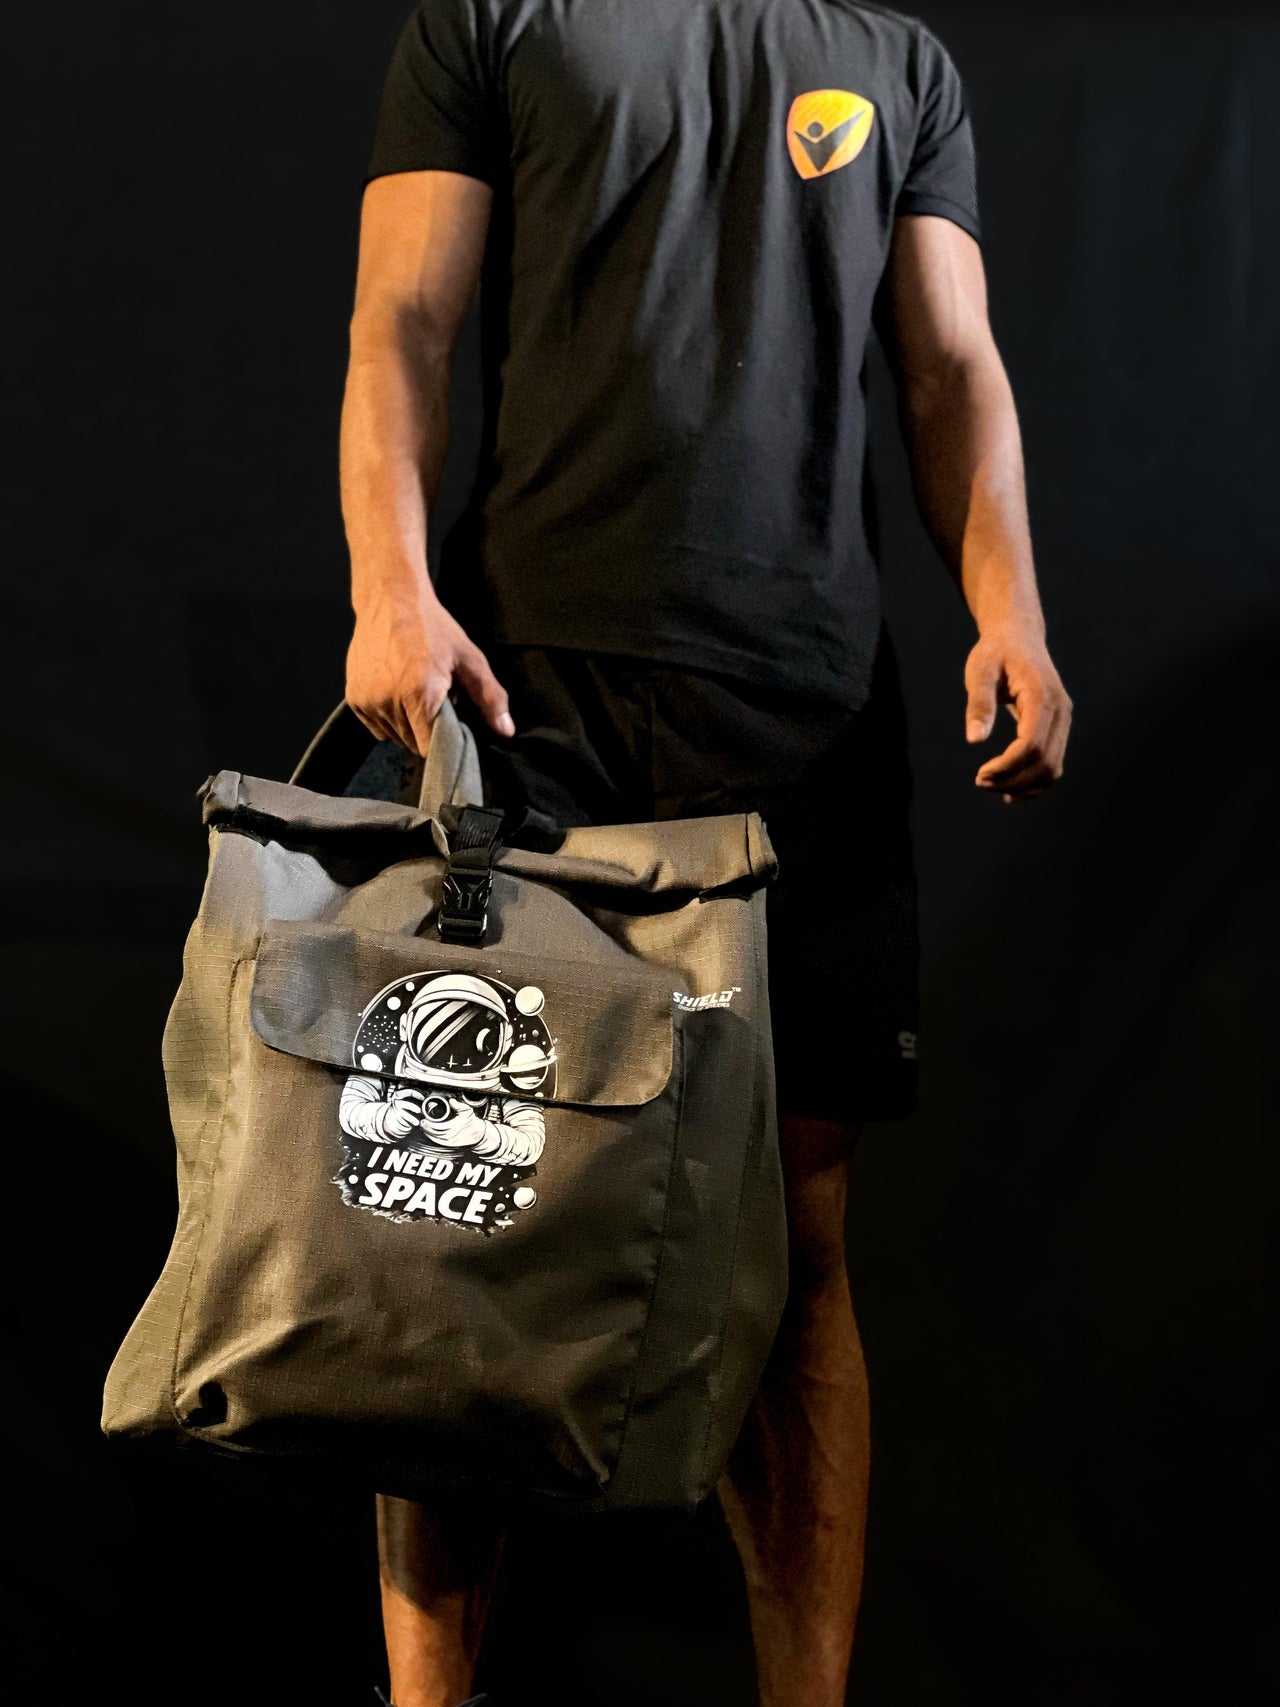 Multi-functional sports bag displayed in gym setting, ideal for workouts and exercise routines.